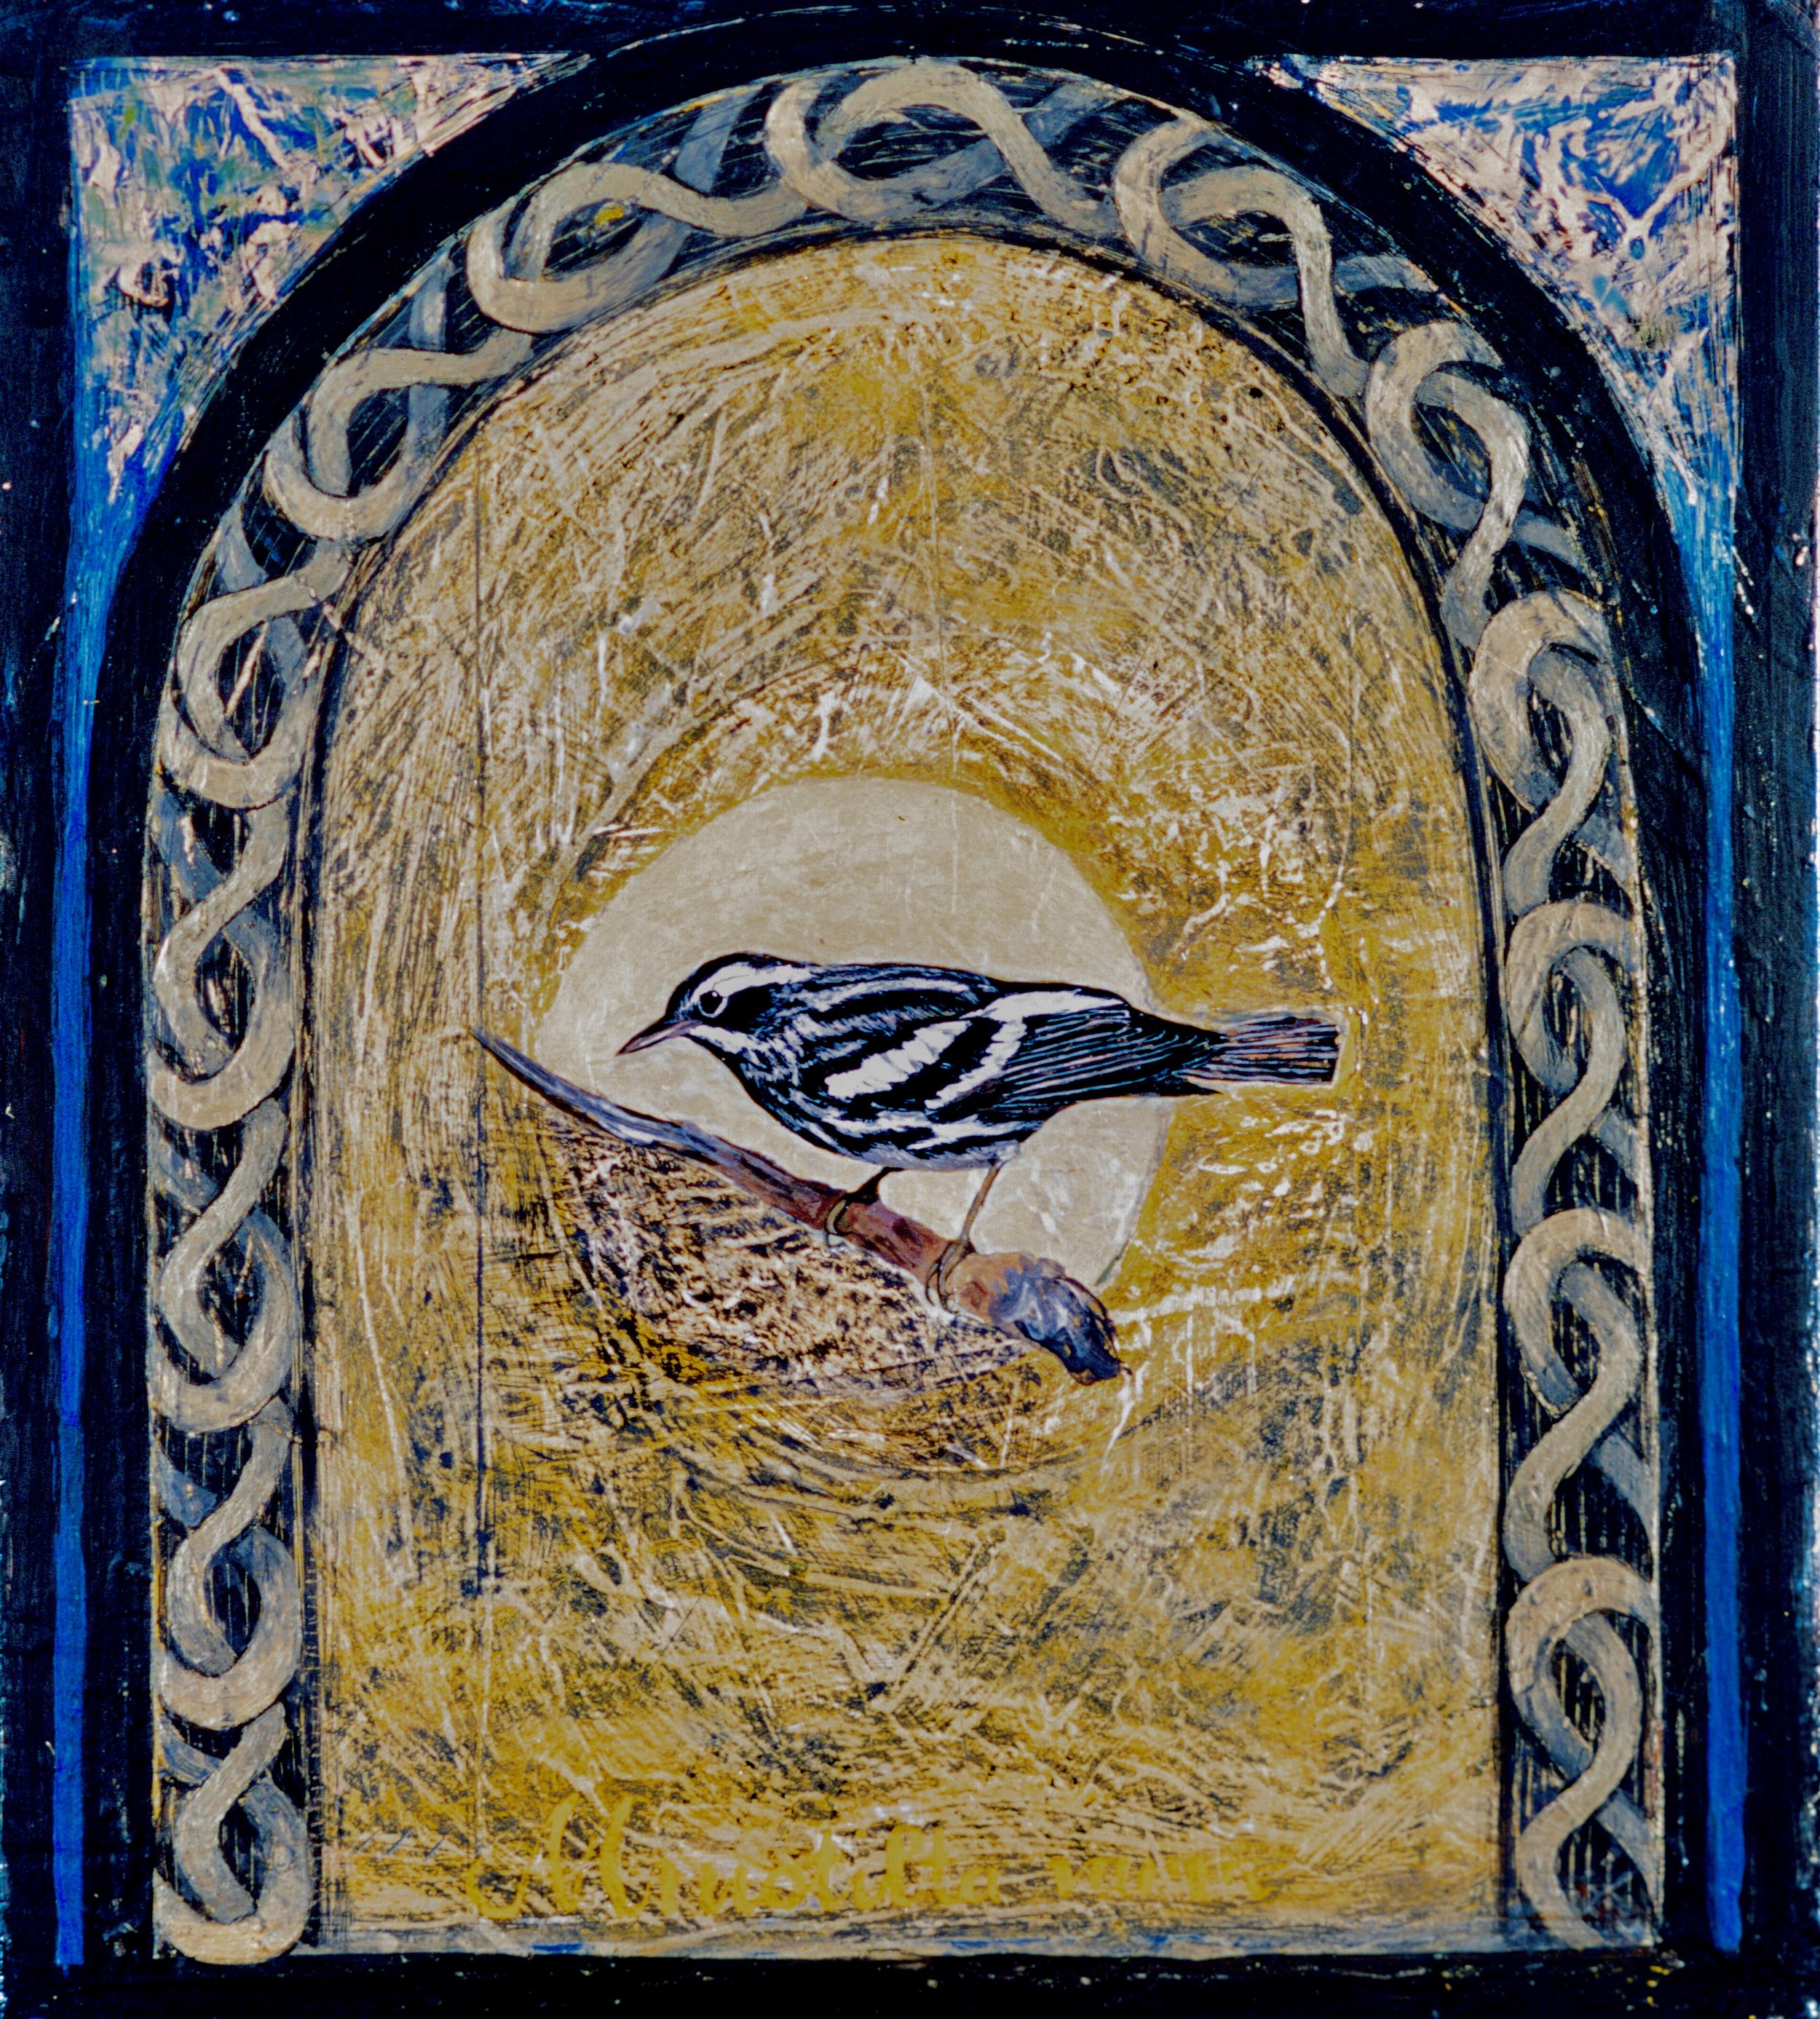 Black and White Warbler, 2001, 23 ½ x 19 ½, gouache and acrylic on wood panel, $800